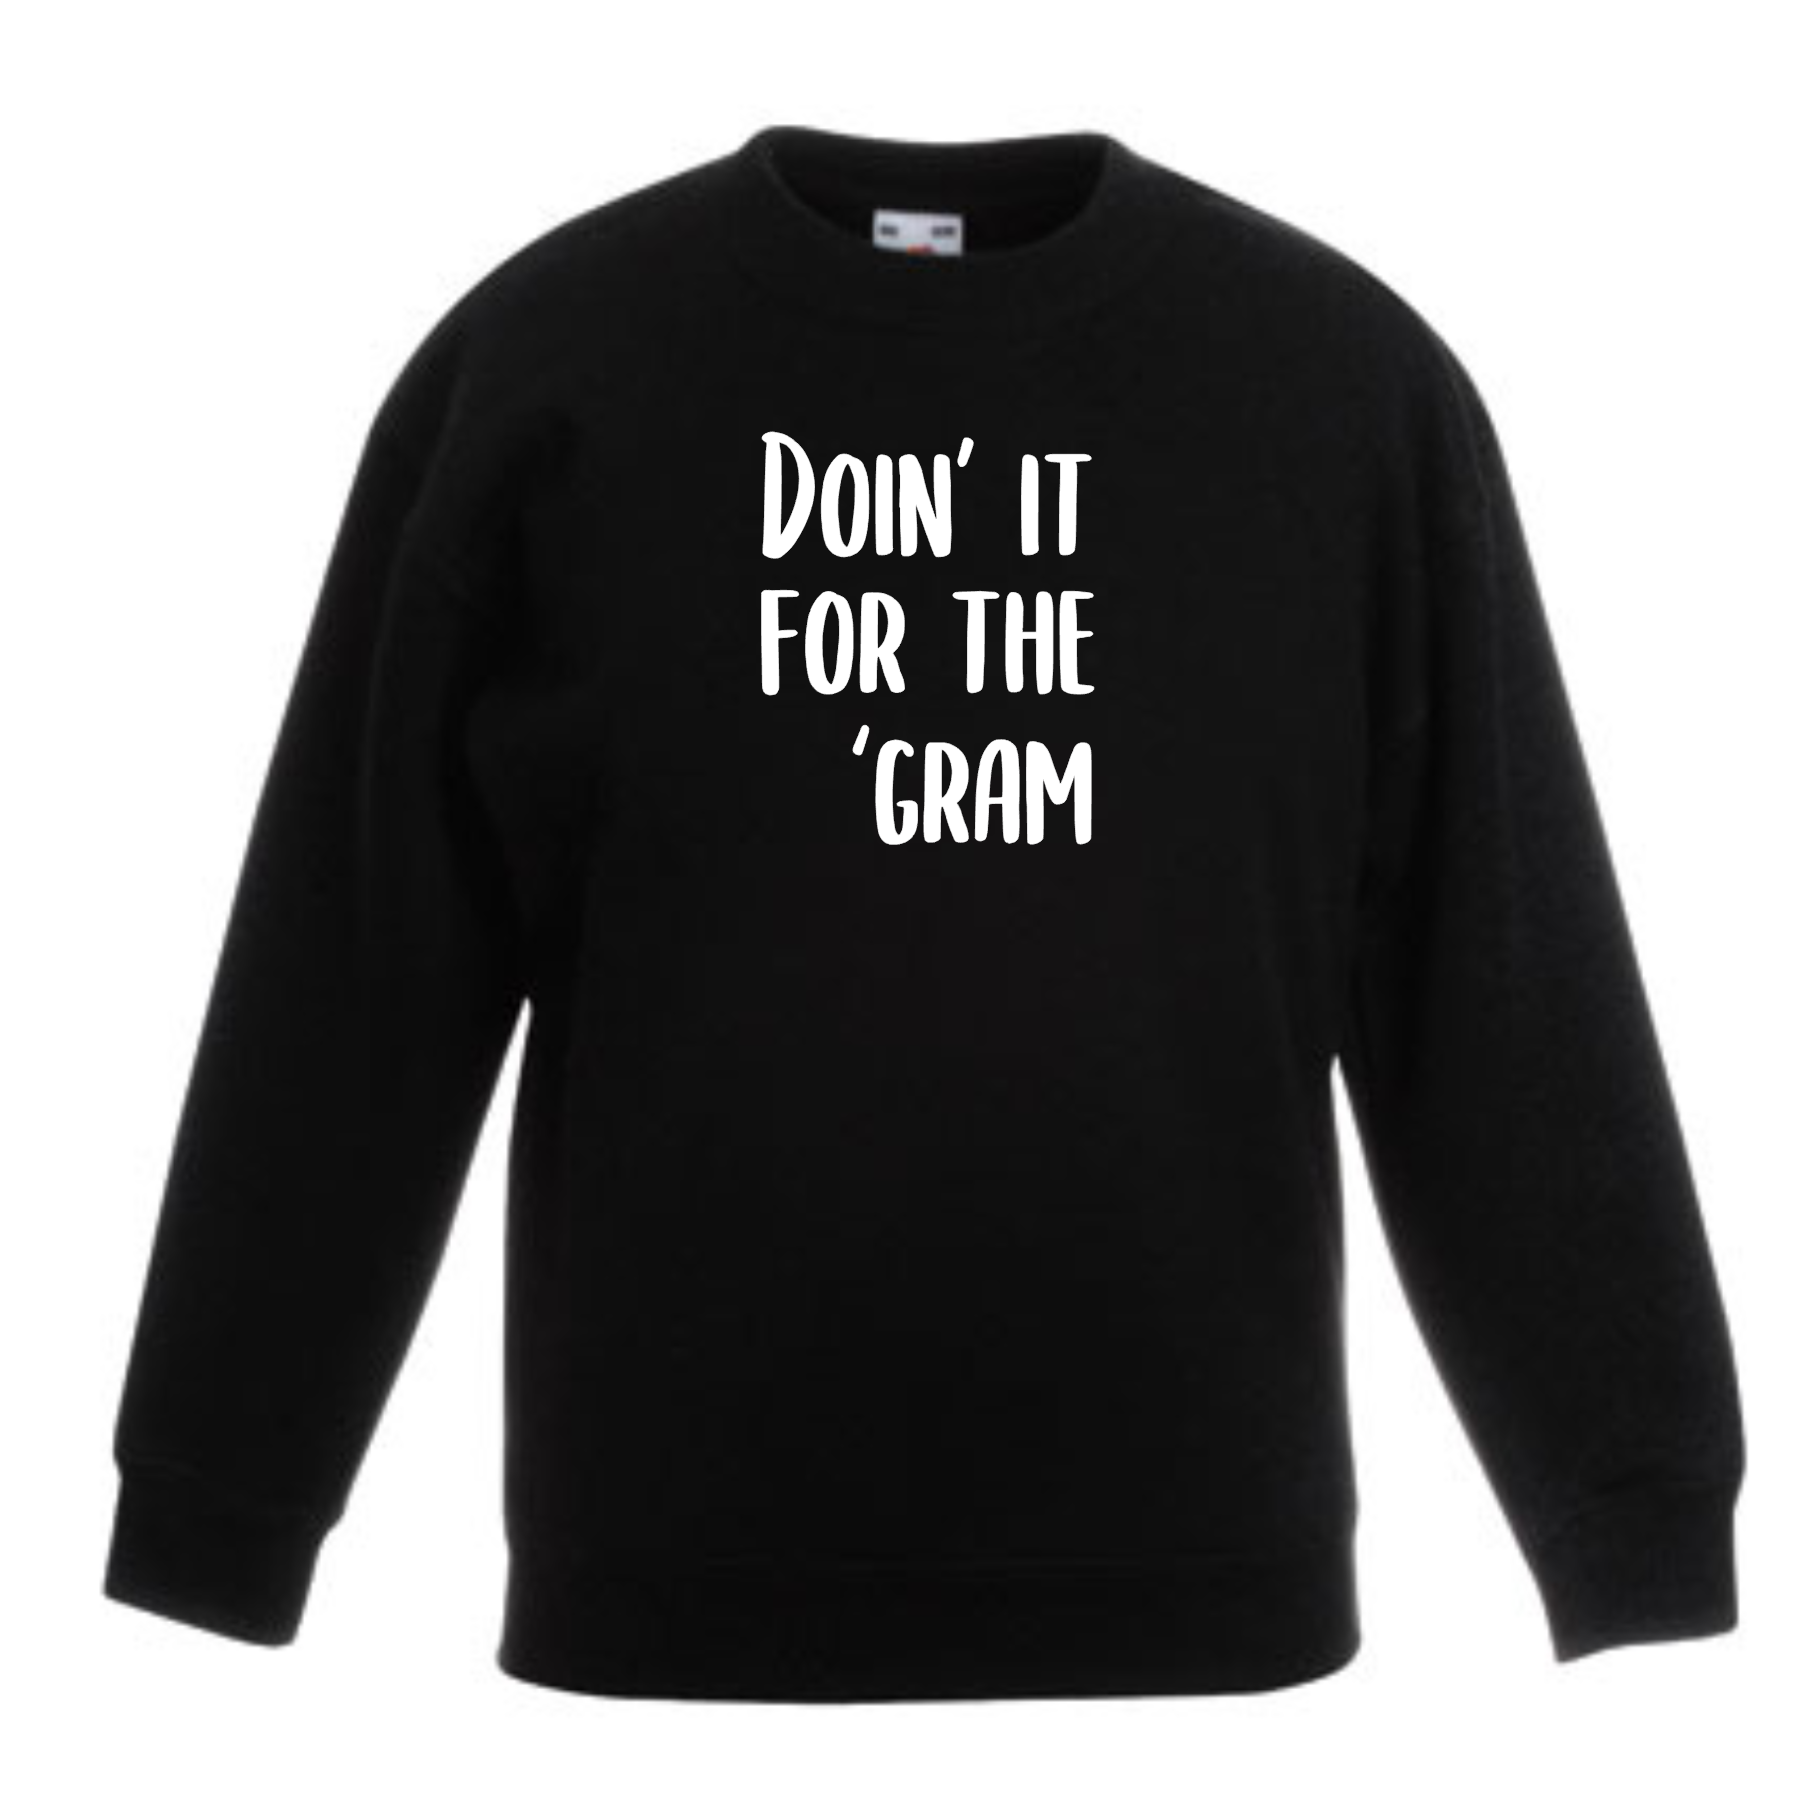 Kids sweater | Doin’ it for the ‘gram